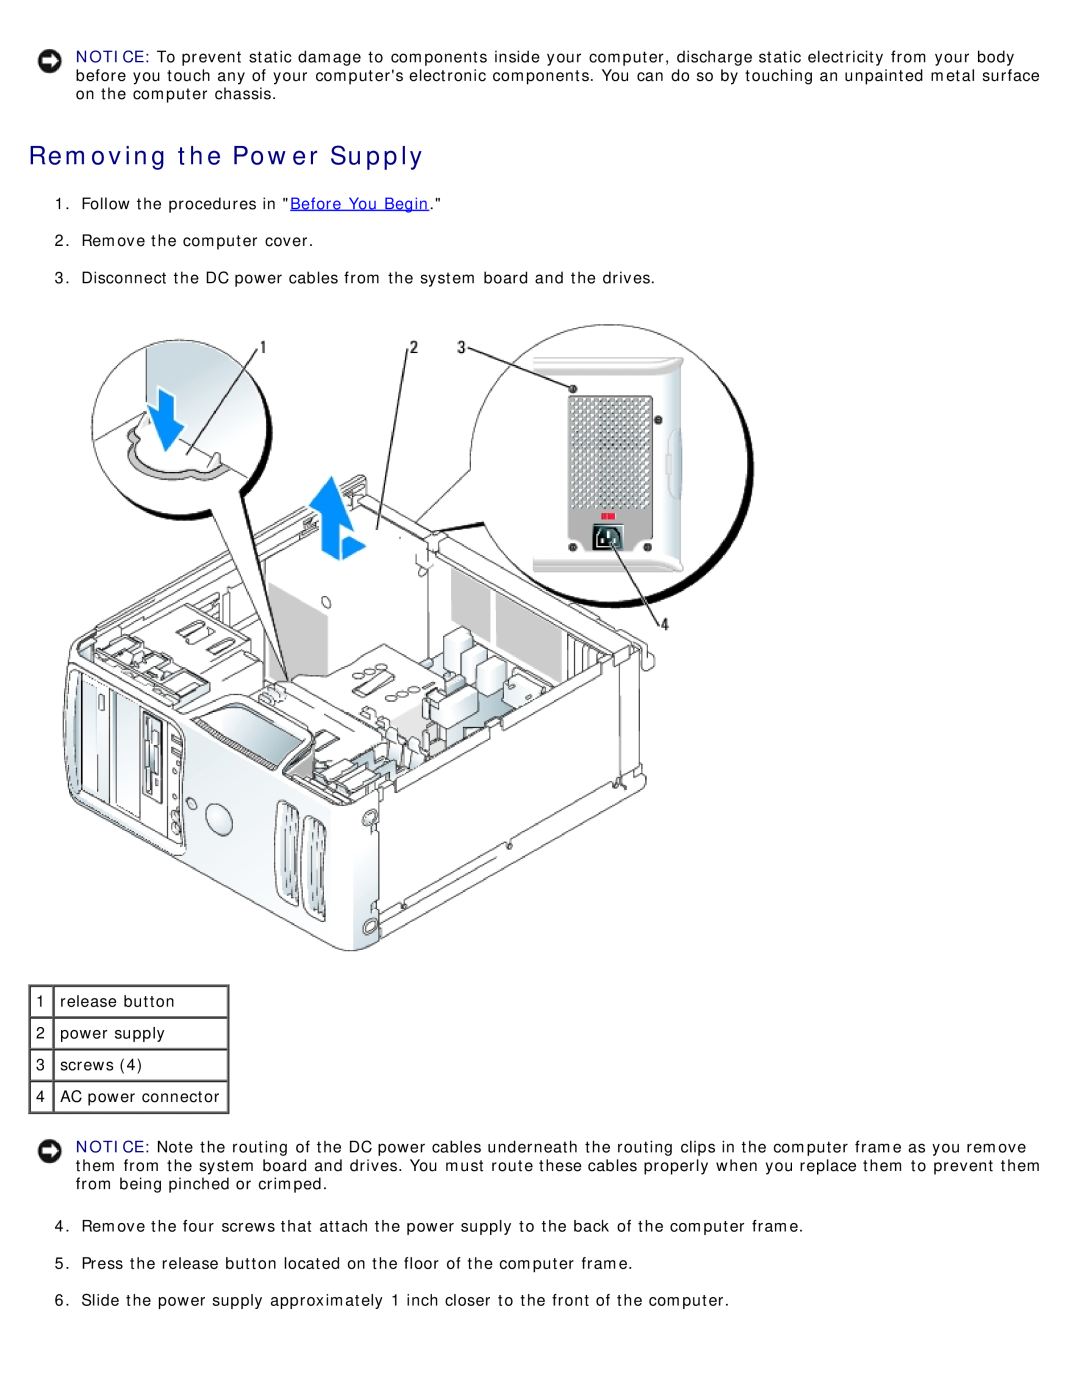 Dell DCSM manual Removing the Power Supply 